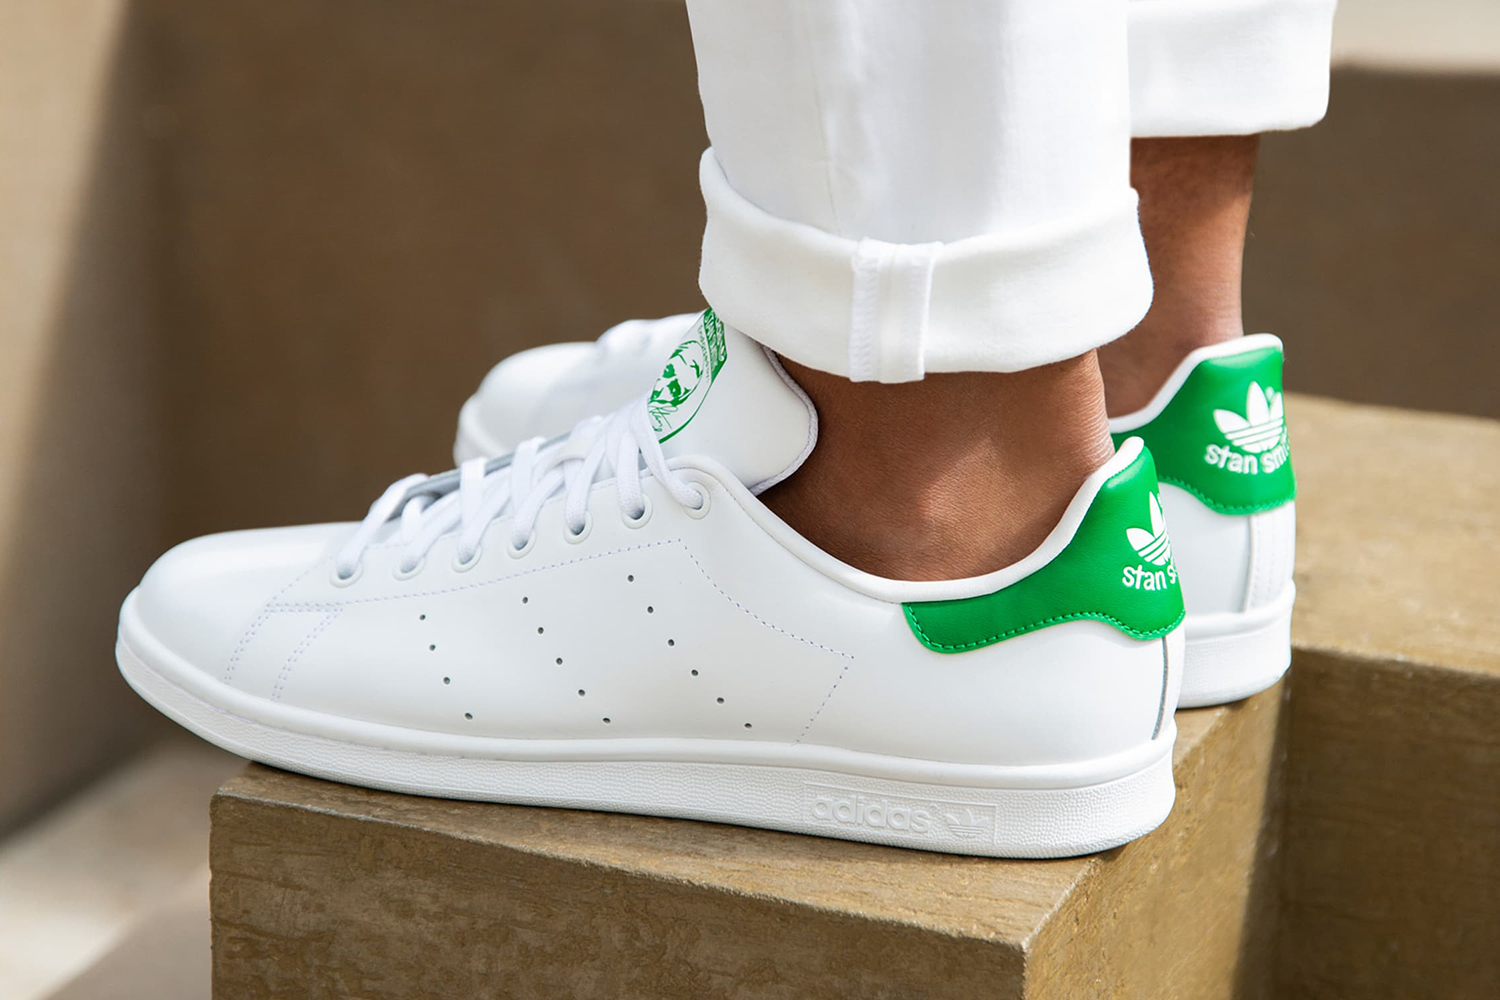 This Stan Smith Adidas Discount at 